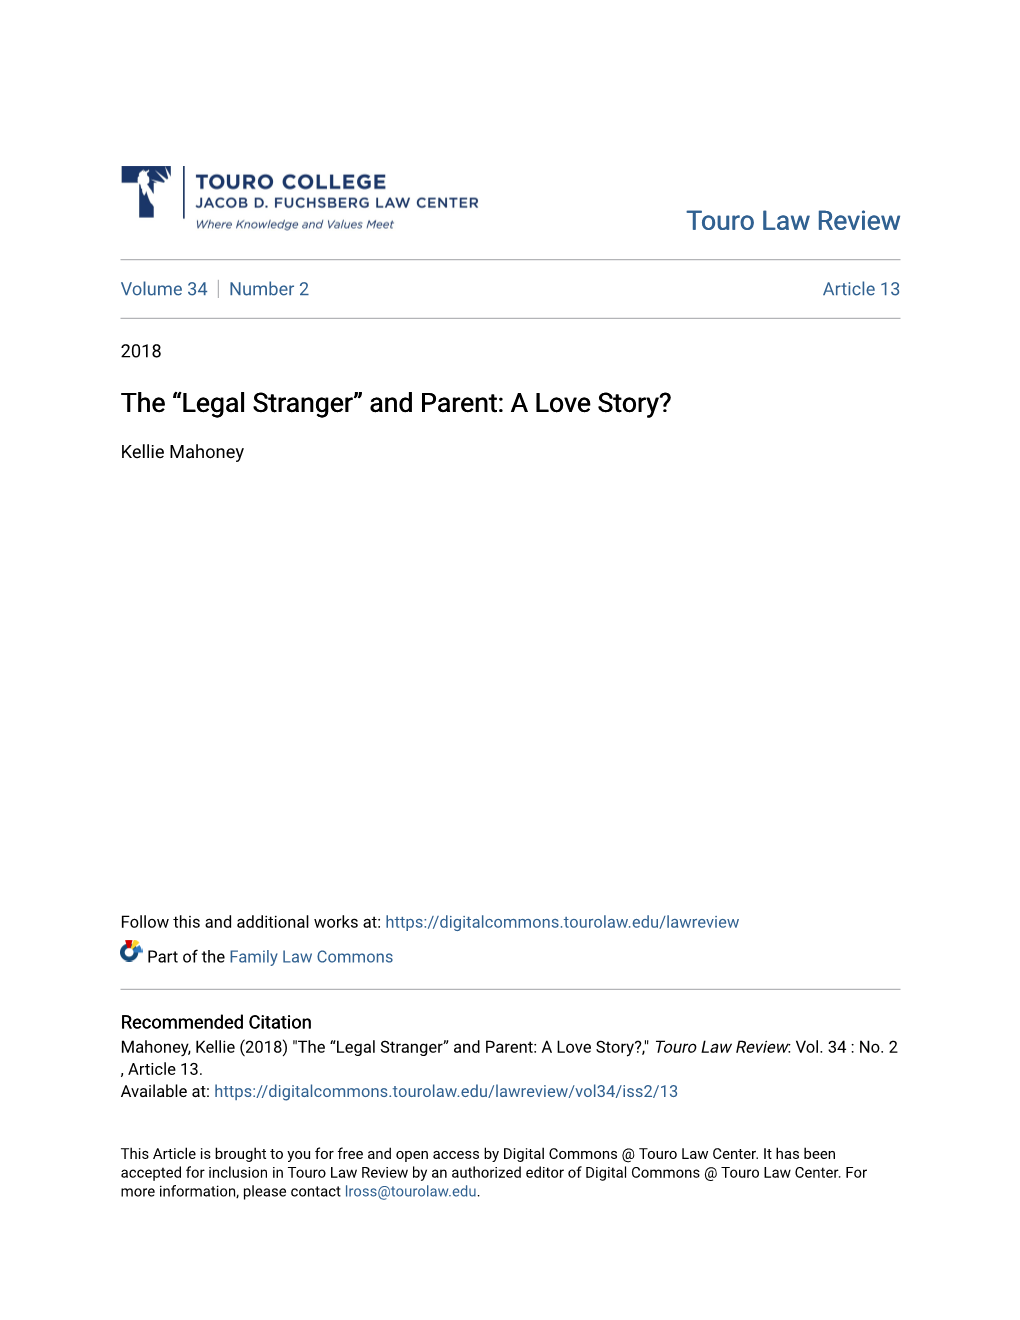 The “Legal Stranger” and Parent: a Love Story?